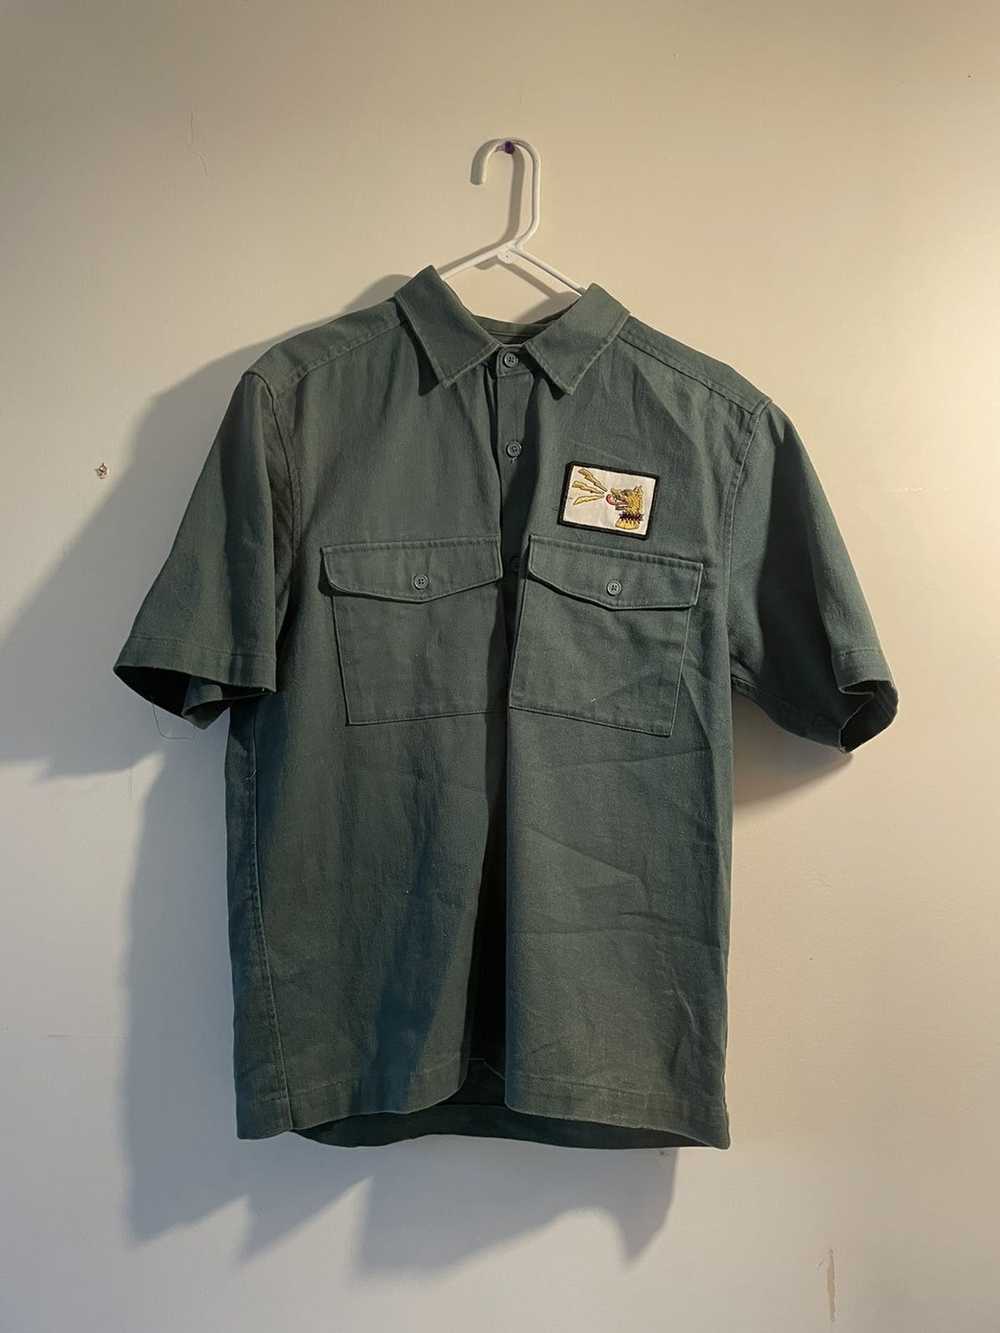 Urban Outfitters Urban outfitters work shirt - image 1